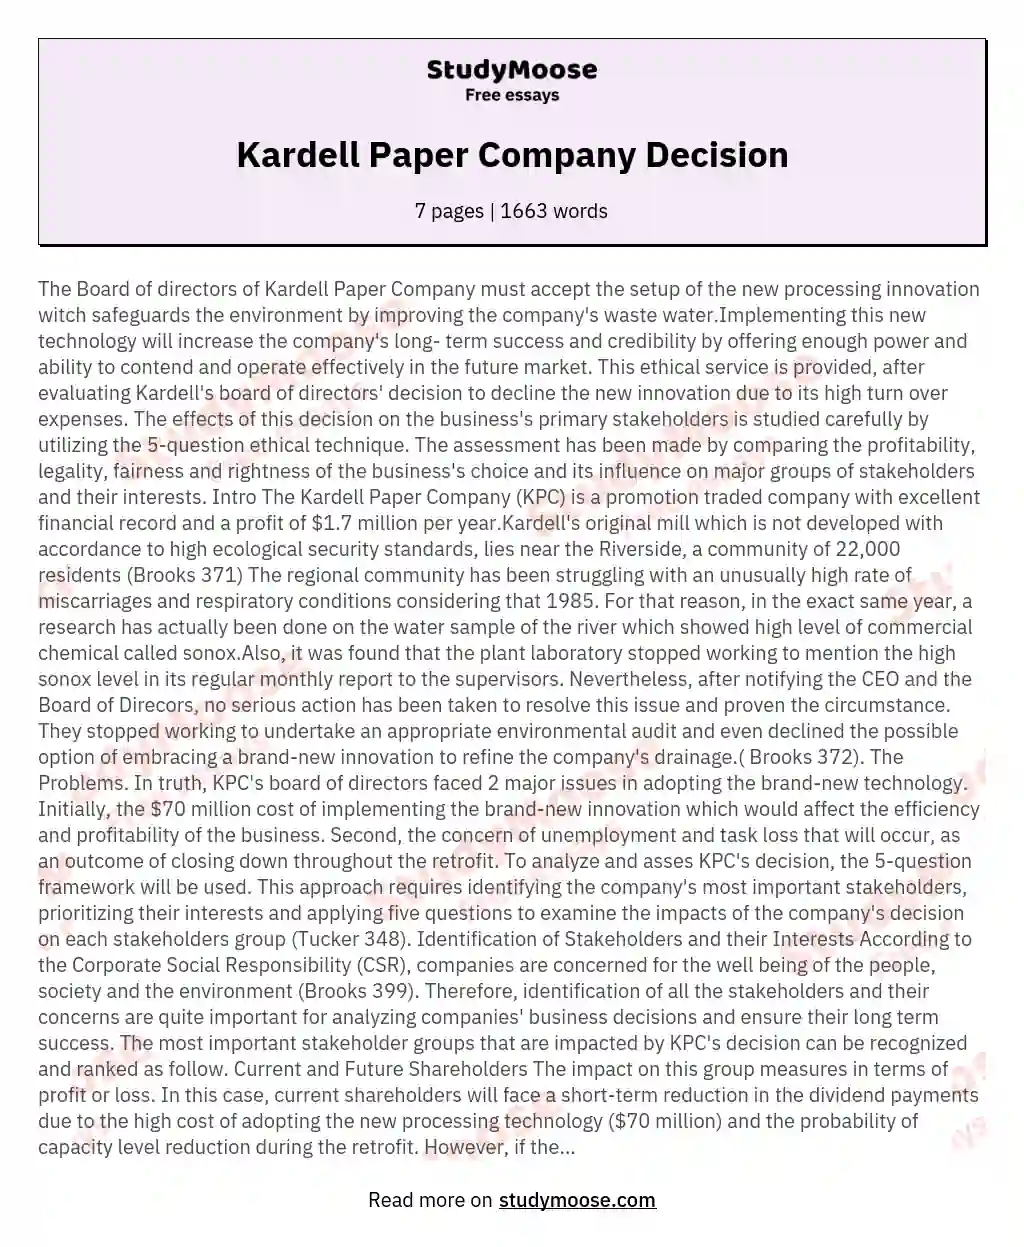 Kardell Paper Company Decision essay